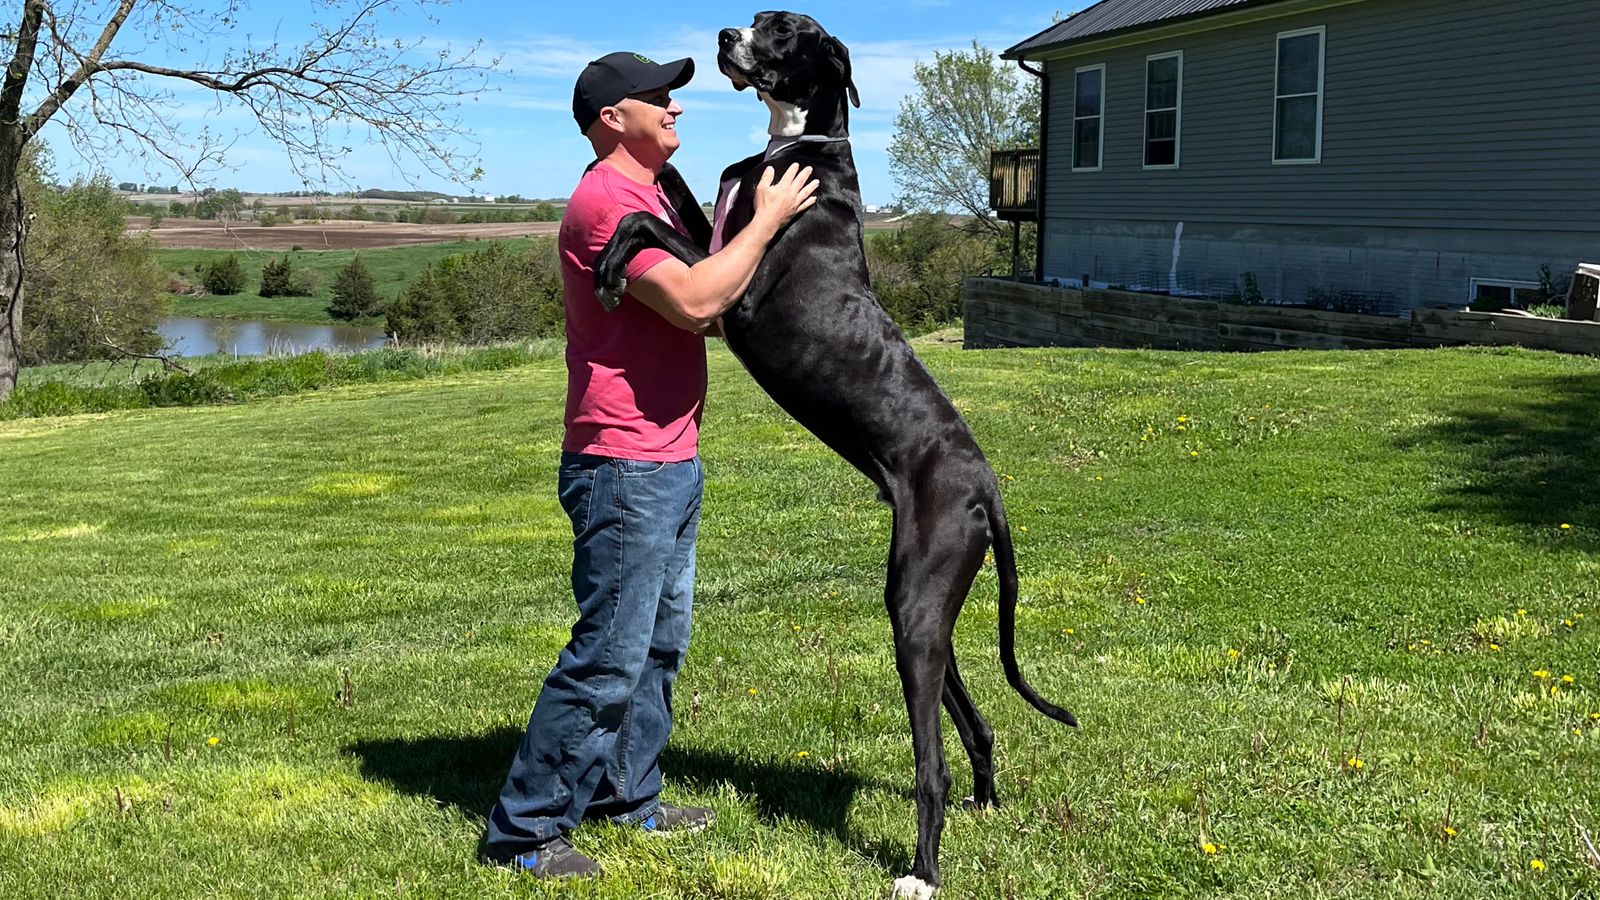 World's tallest dog dies just weeks after receiving Guinness World Record